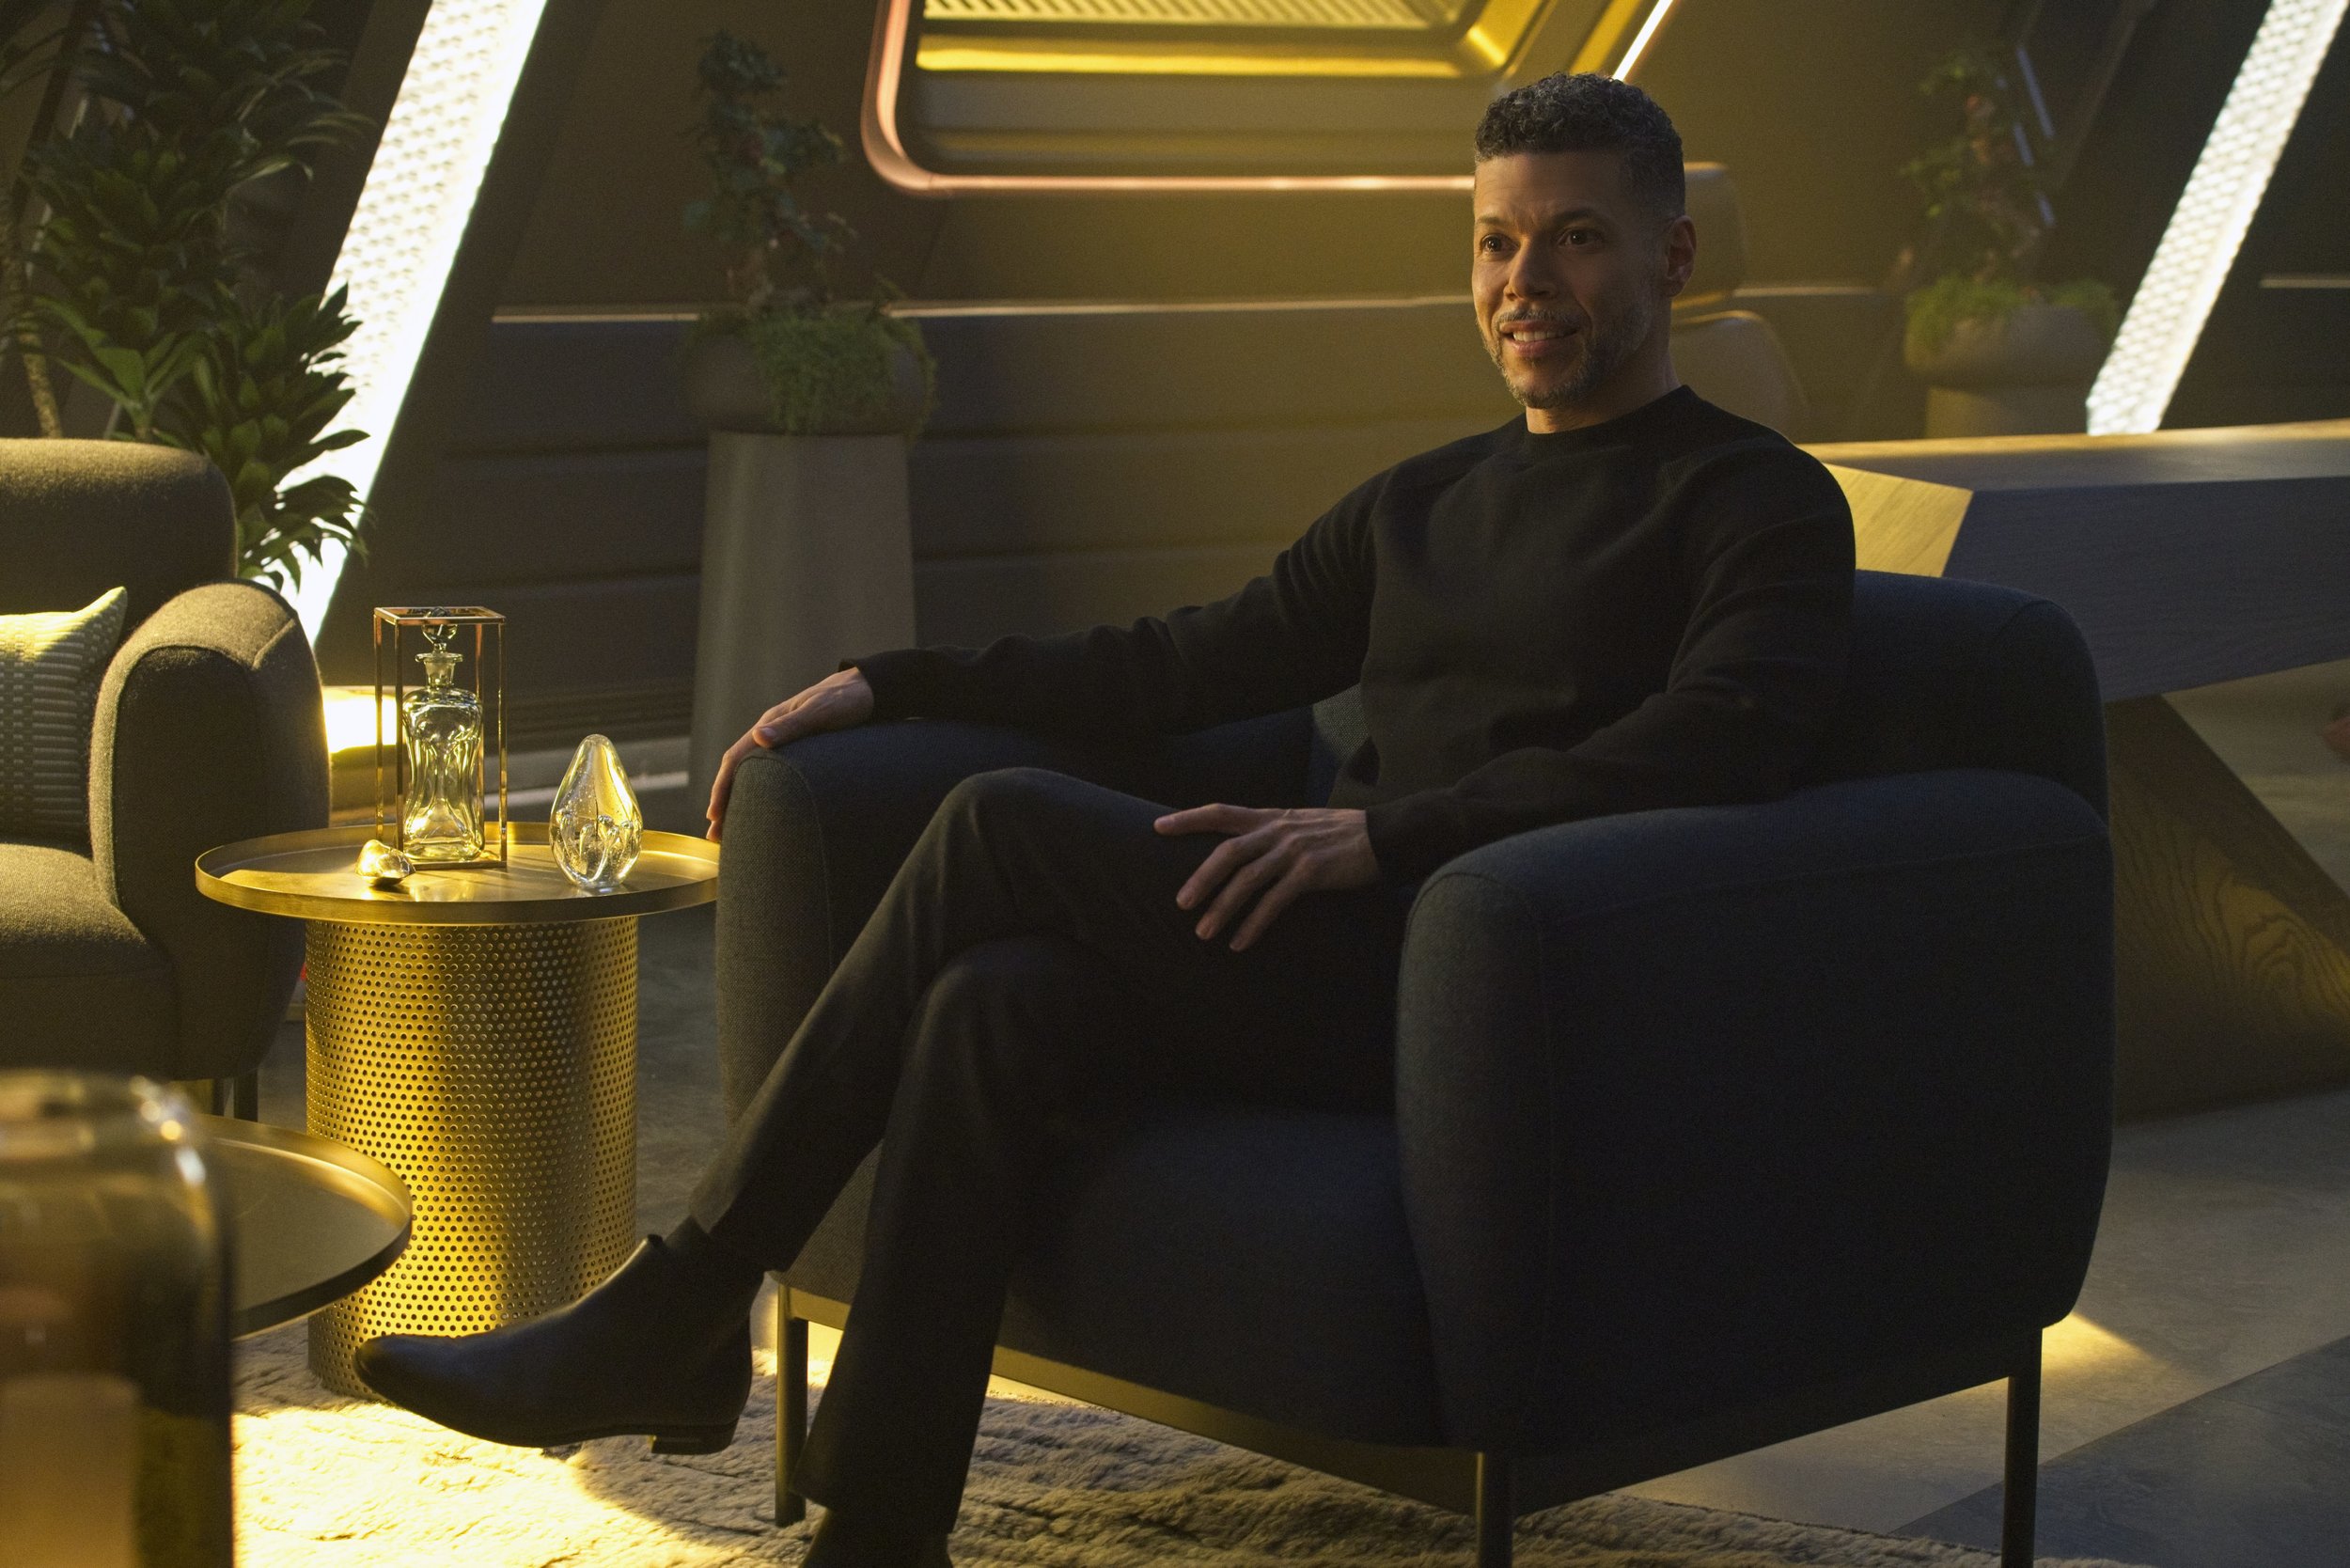   Pictured: Wilson Cruz as Culber of the Paramount+ original series STAR TREK: DISCOVERY. Photo Cr: Michael Gibson/Paramount+ © 2021 CBS Interactive. All Rights Reserved.  